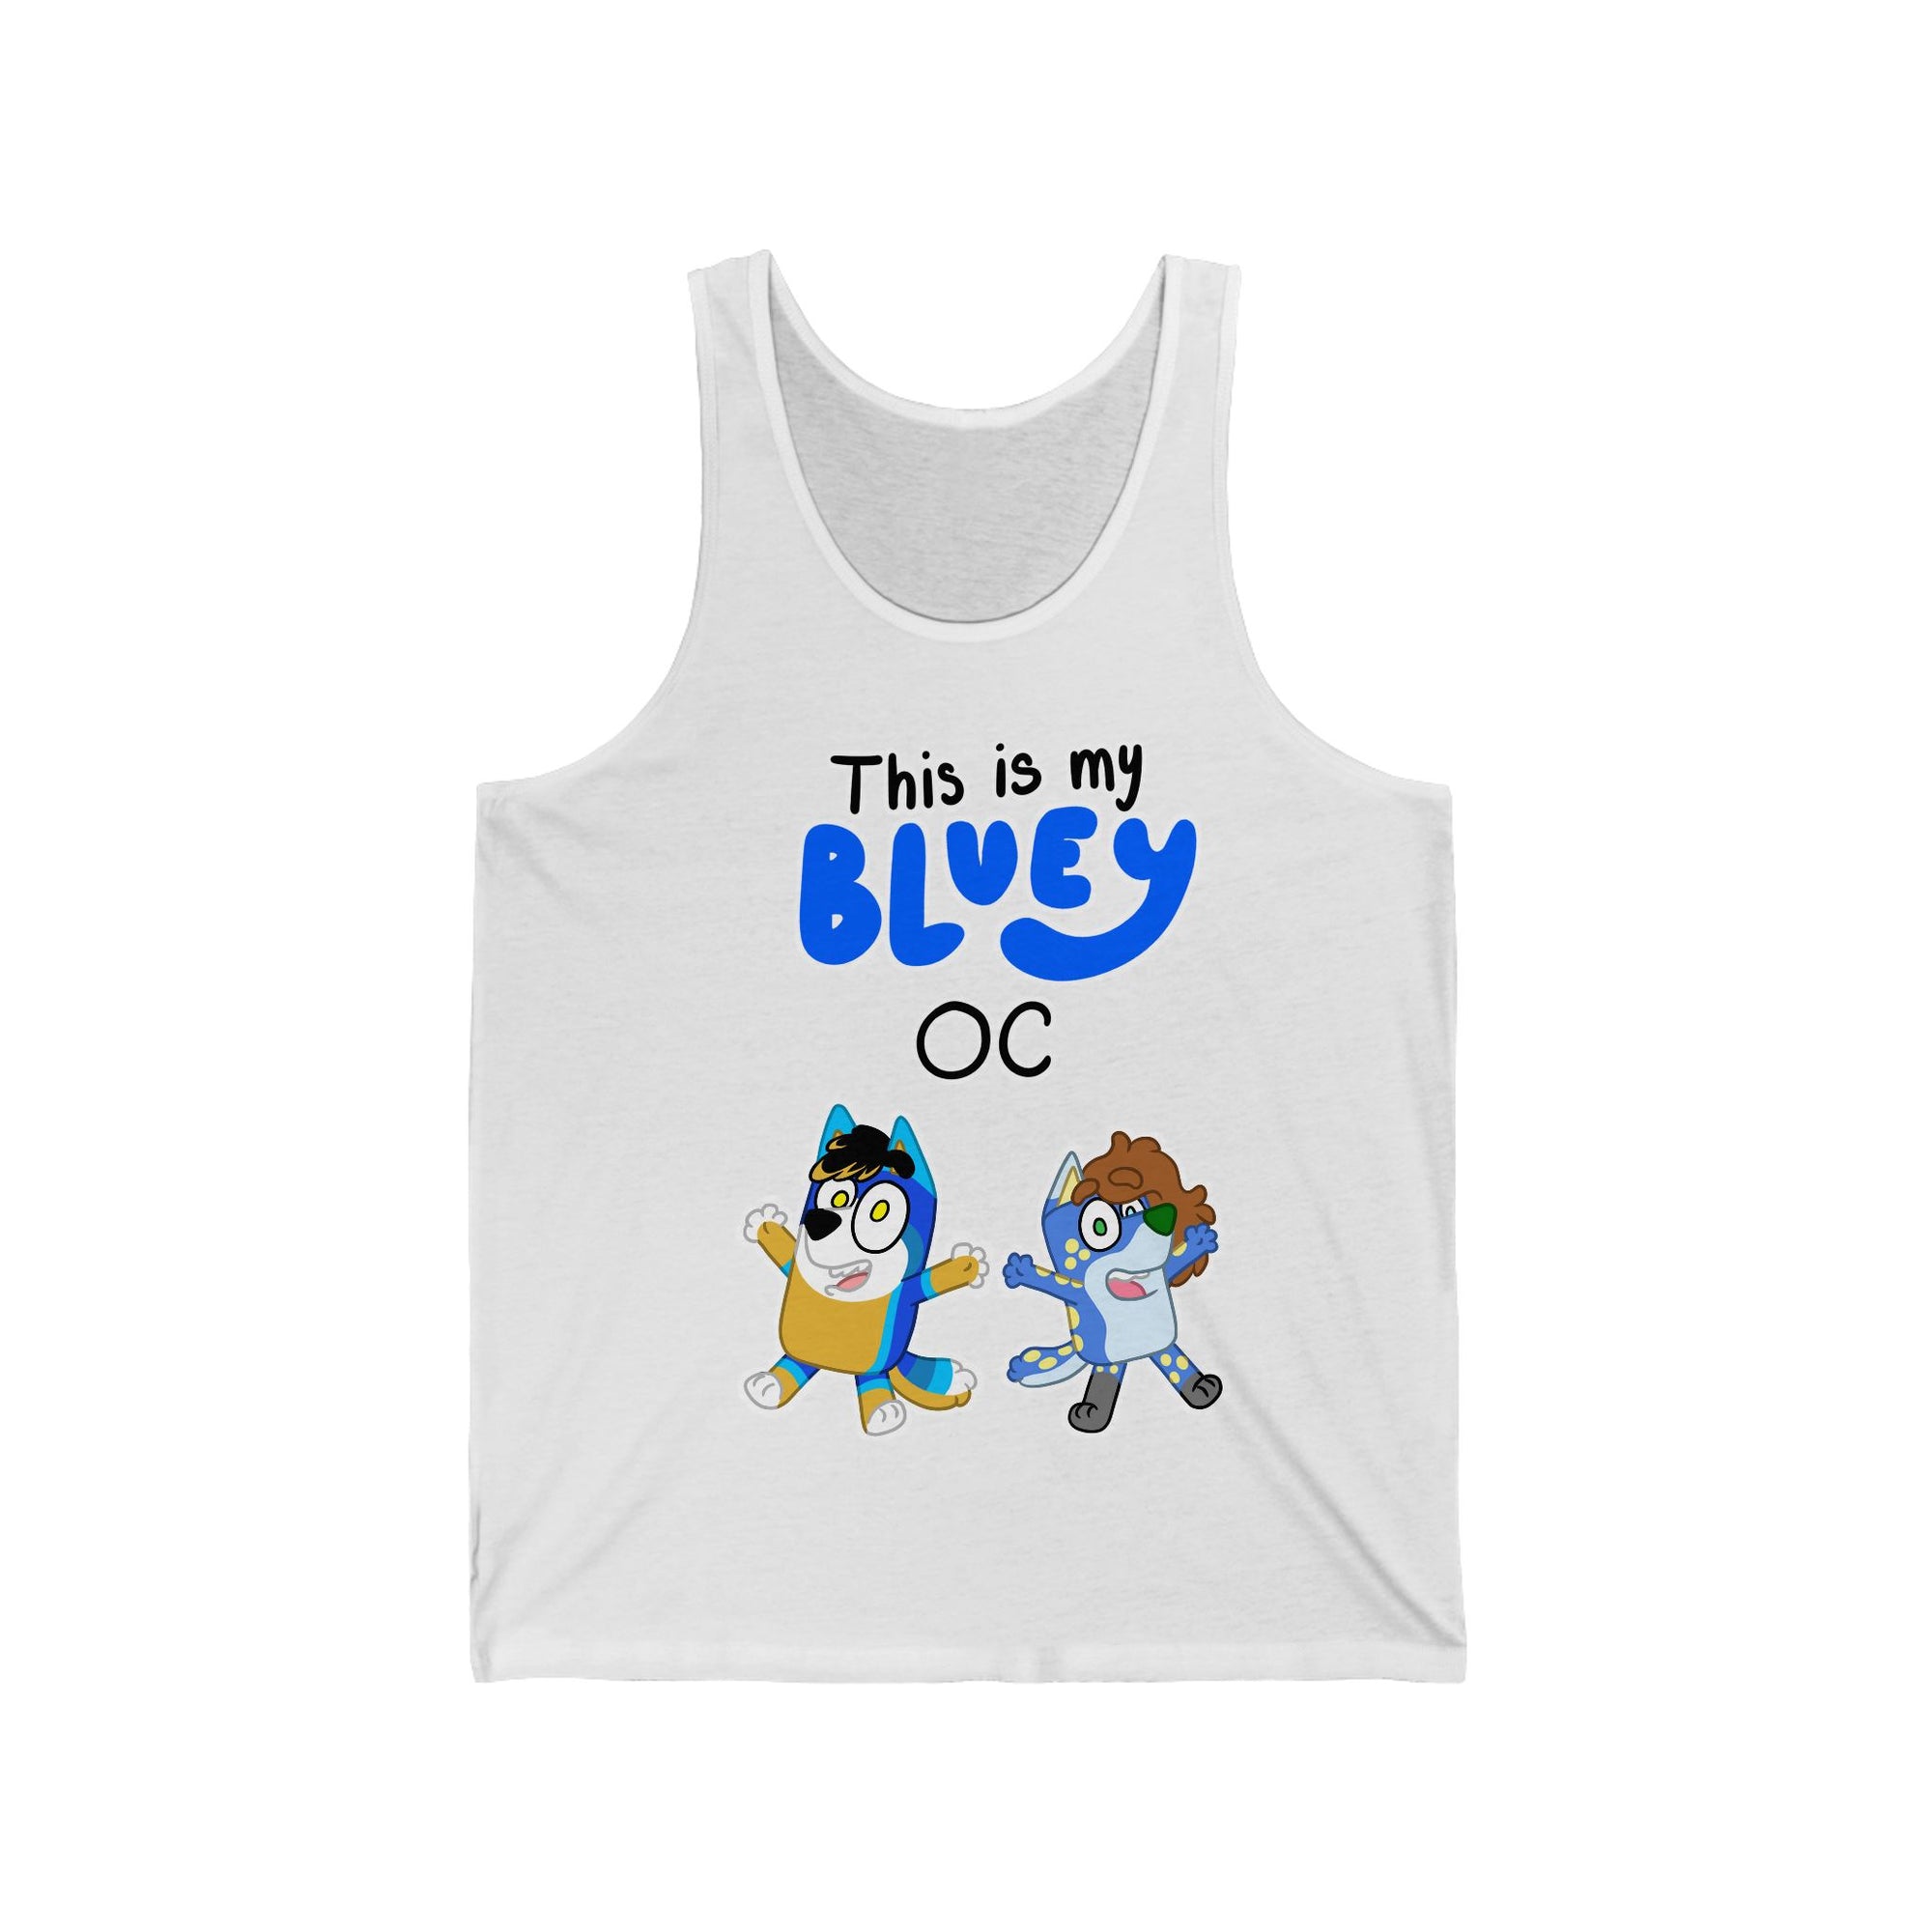 This is my Bluey OC - Tank Top Tank Top AFLT-Hund The Hound 